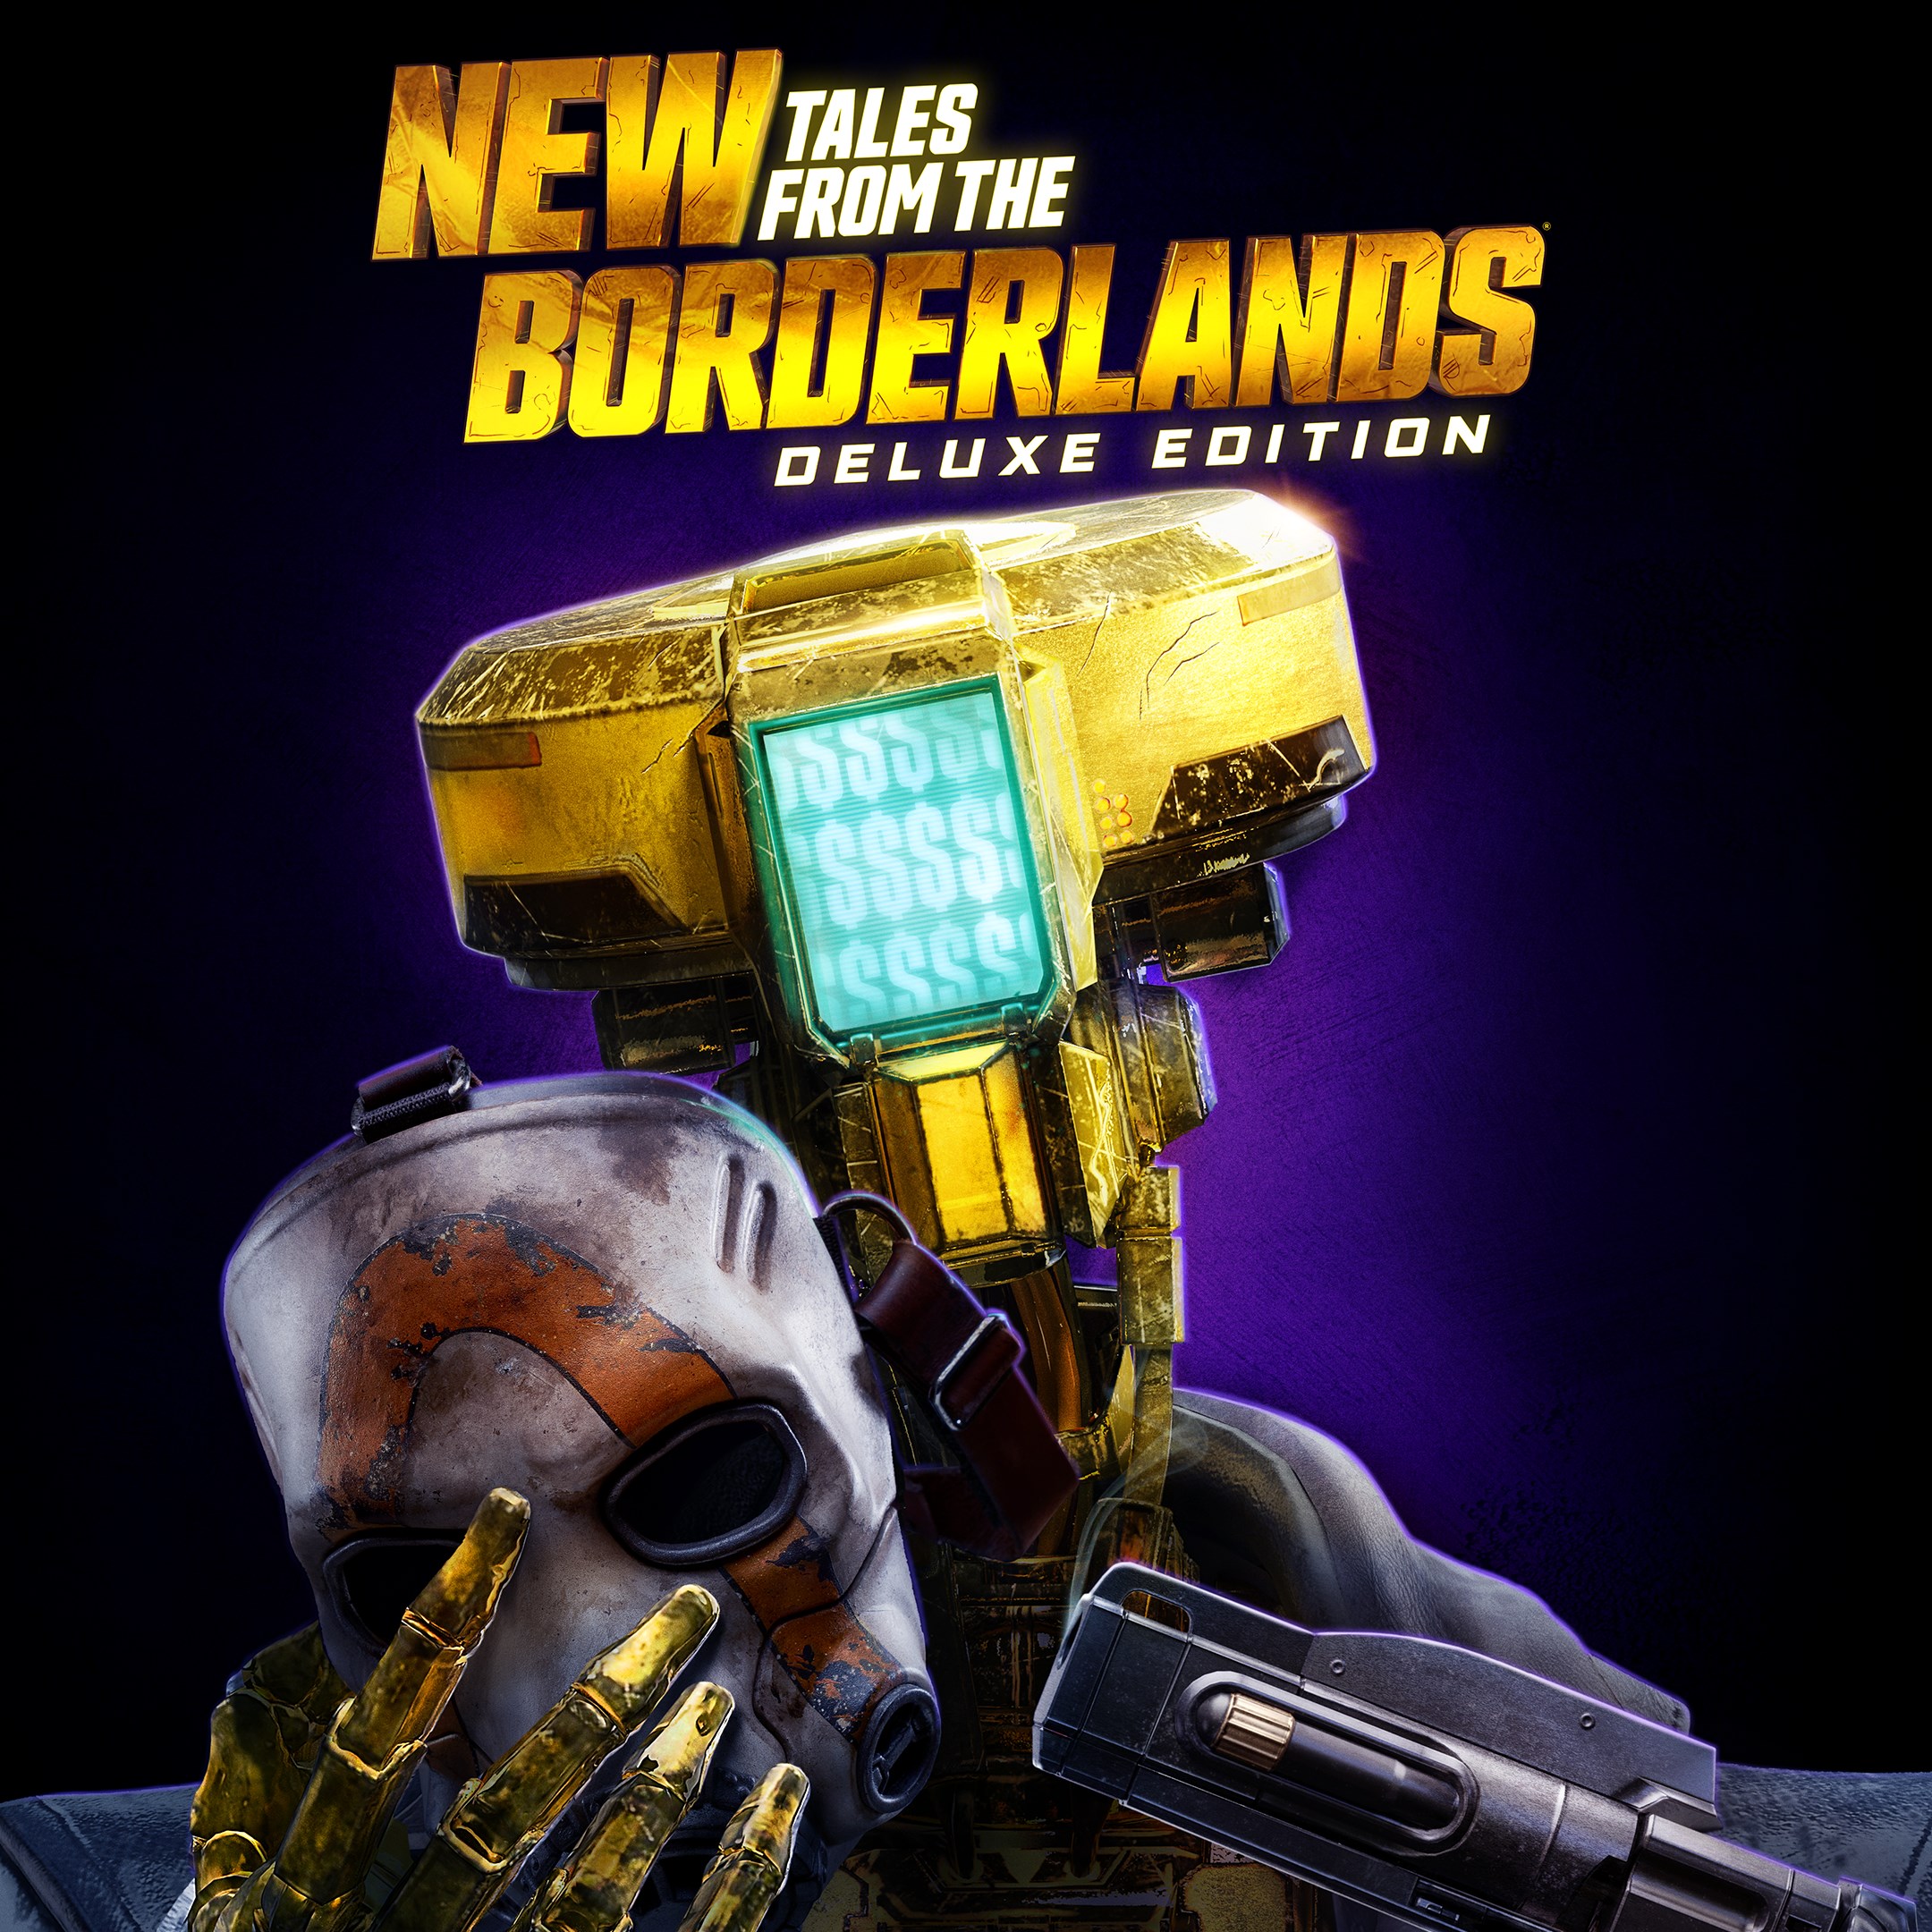 New Tales from the Borderlands: Deluxe Edition Pre-Order Bundle